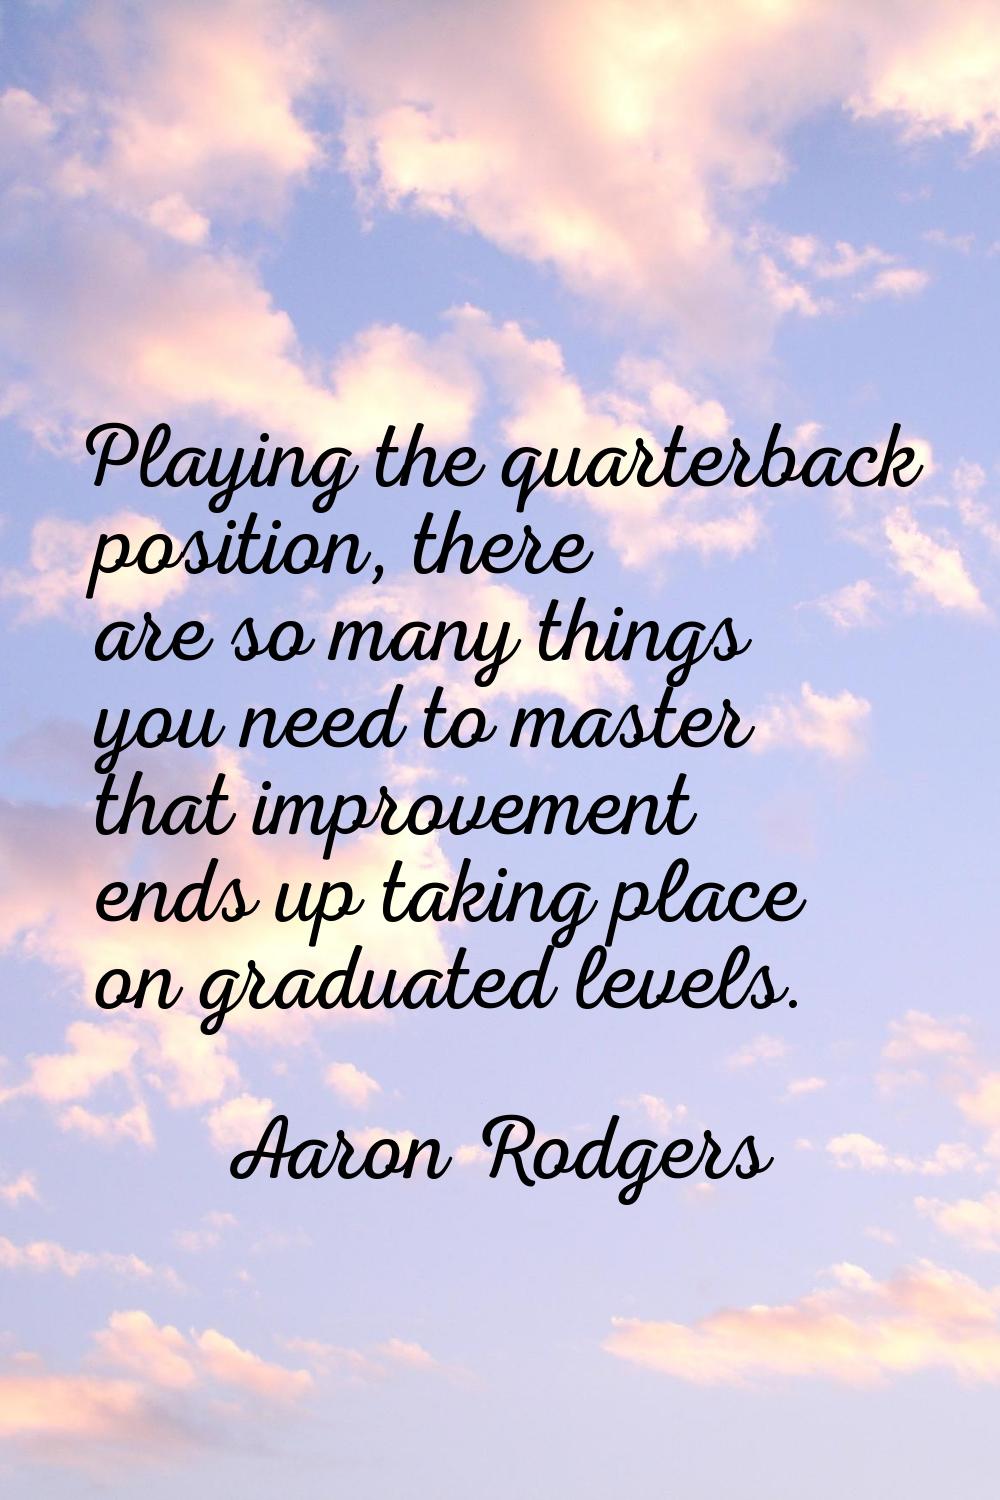 Playing the quarterback position, there are so many things you need to master that improvement ends